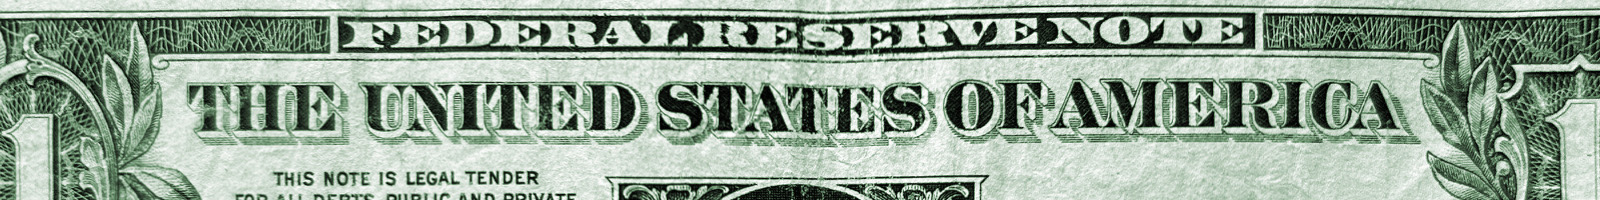 United States of America text from dollar bill